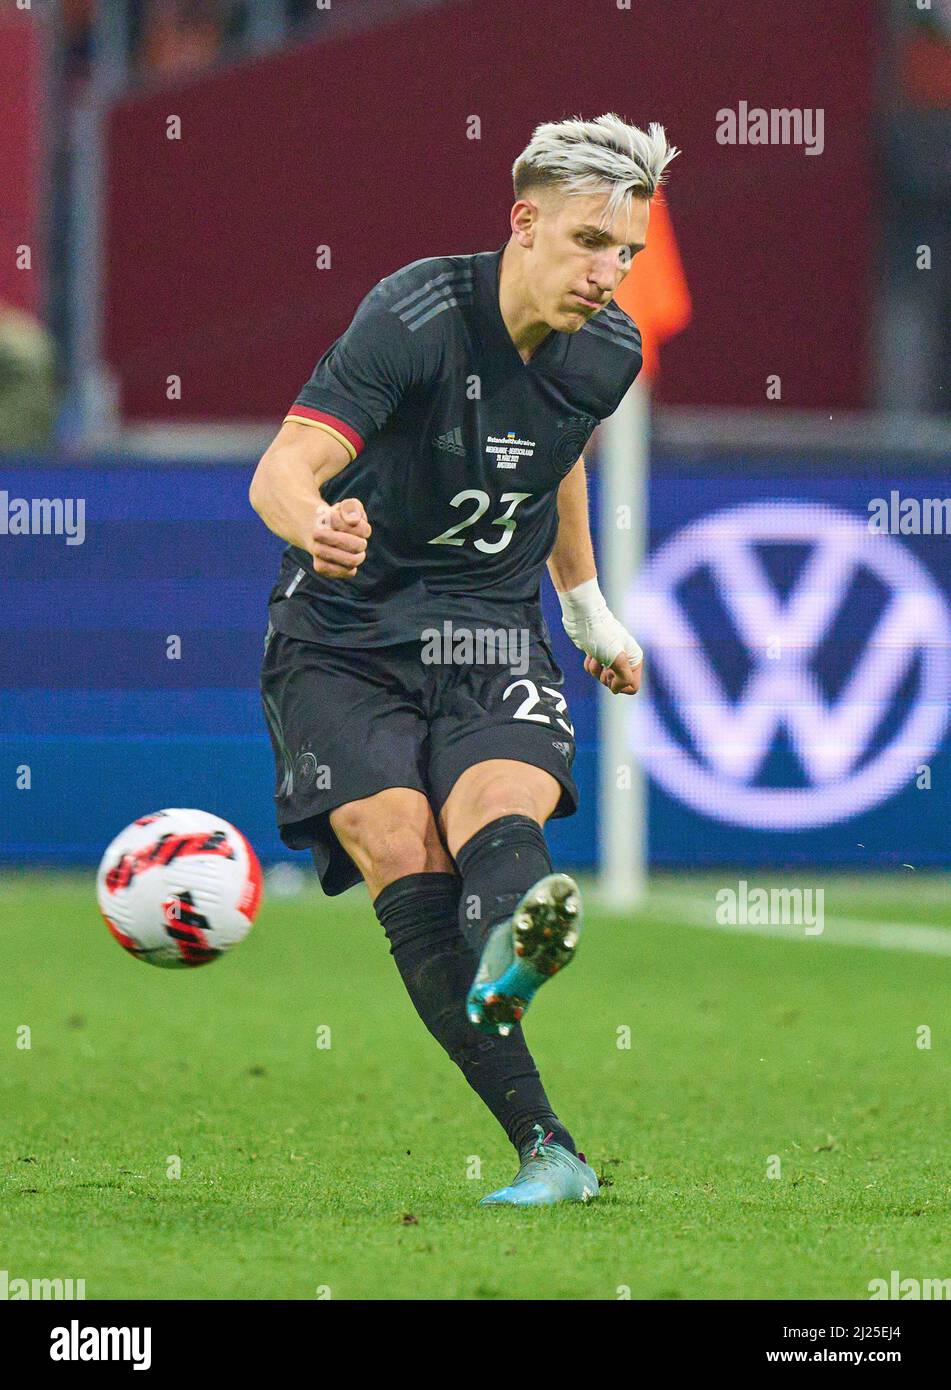 Amsterdam, Netherlands. 29th Mar, 2022. Nico Schlotterbeck, DFB 23  in the friendly match NETHERLANDS - GERMANY 1-1 Preparation for World Championships 2022 in Qatar ,Season 2021/2022, on Mar 29, 2022  in Amsterdam, Netherlands.  © Peter Schatz / Alamy Live News Credit: Peter Schatz/Alamy Live News Stock Photo